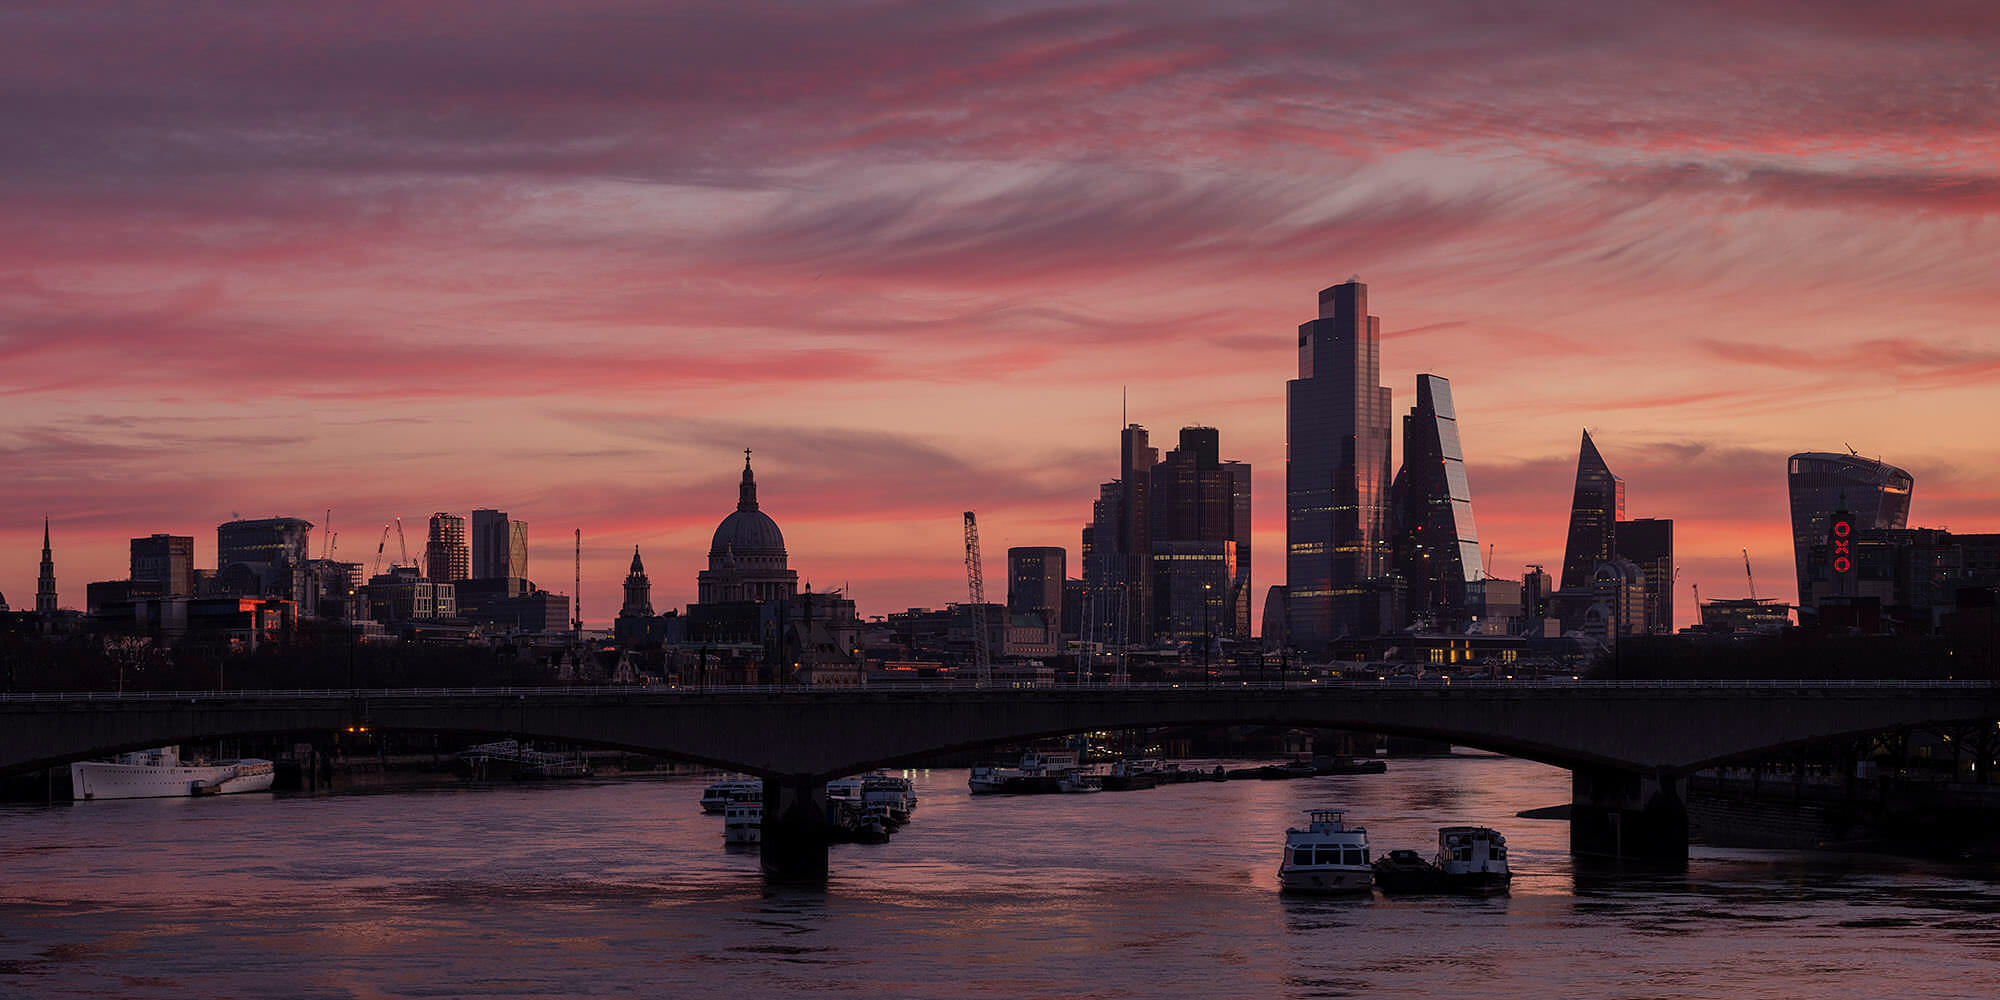 Photograph of London skyline under pink cloudy sky at dawn